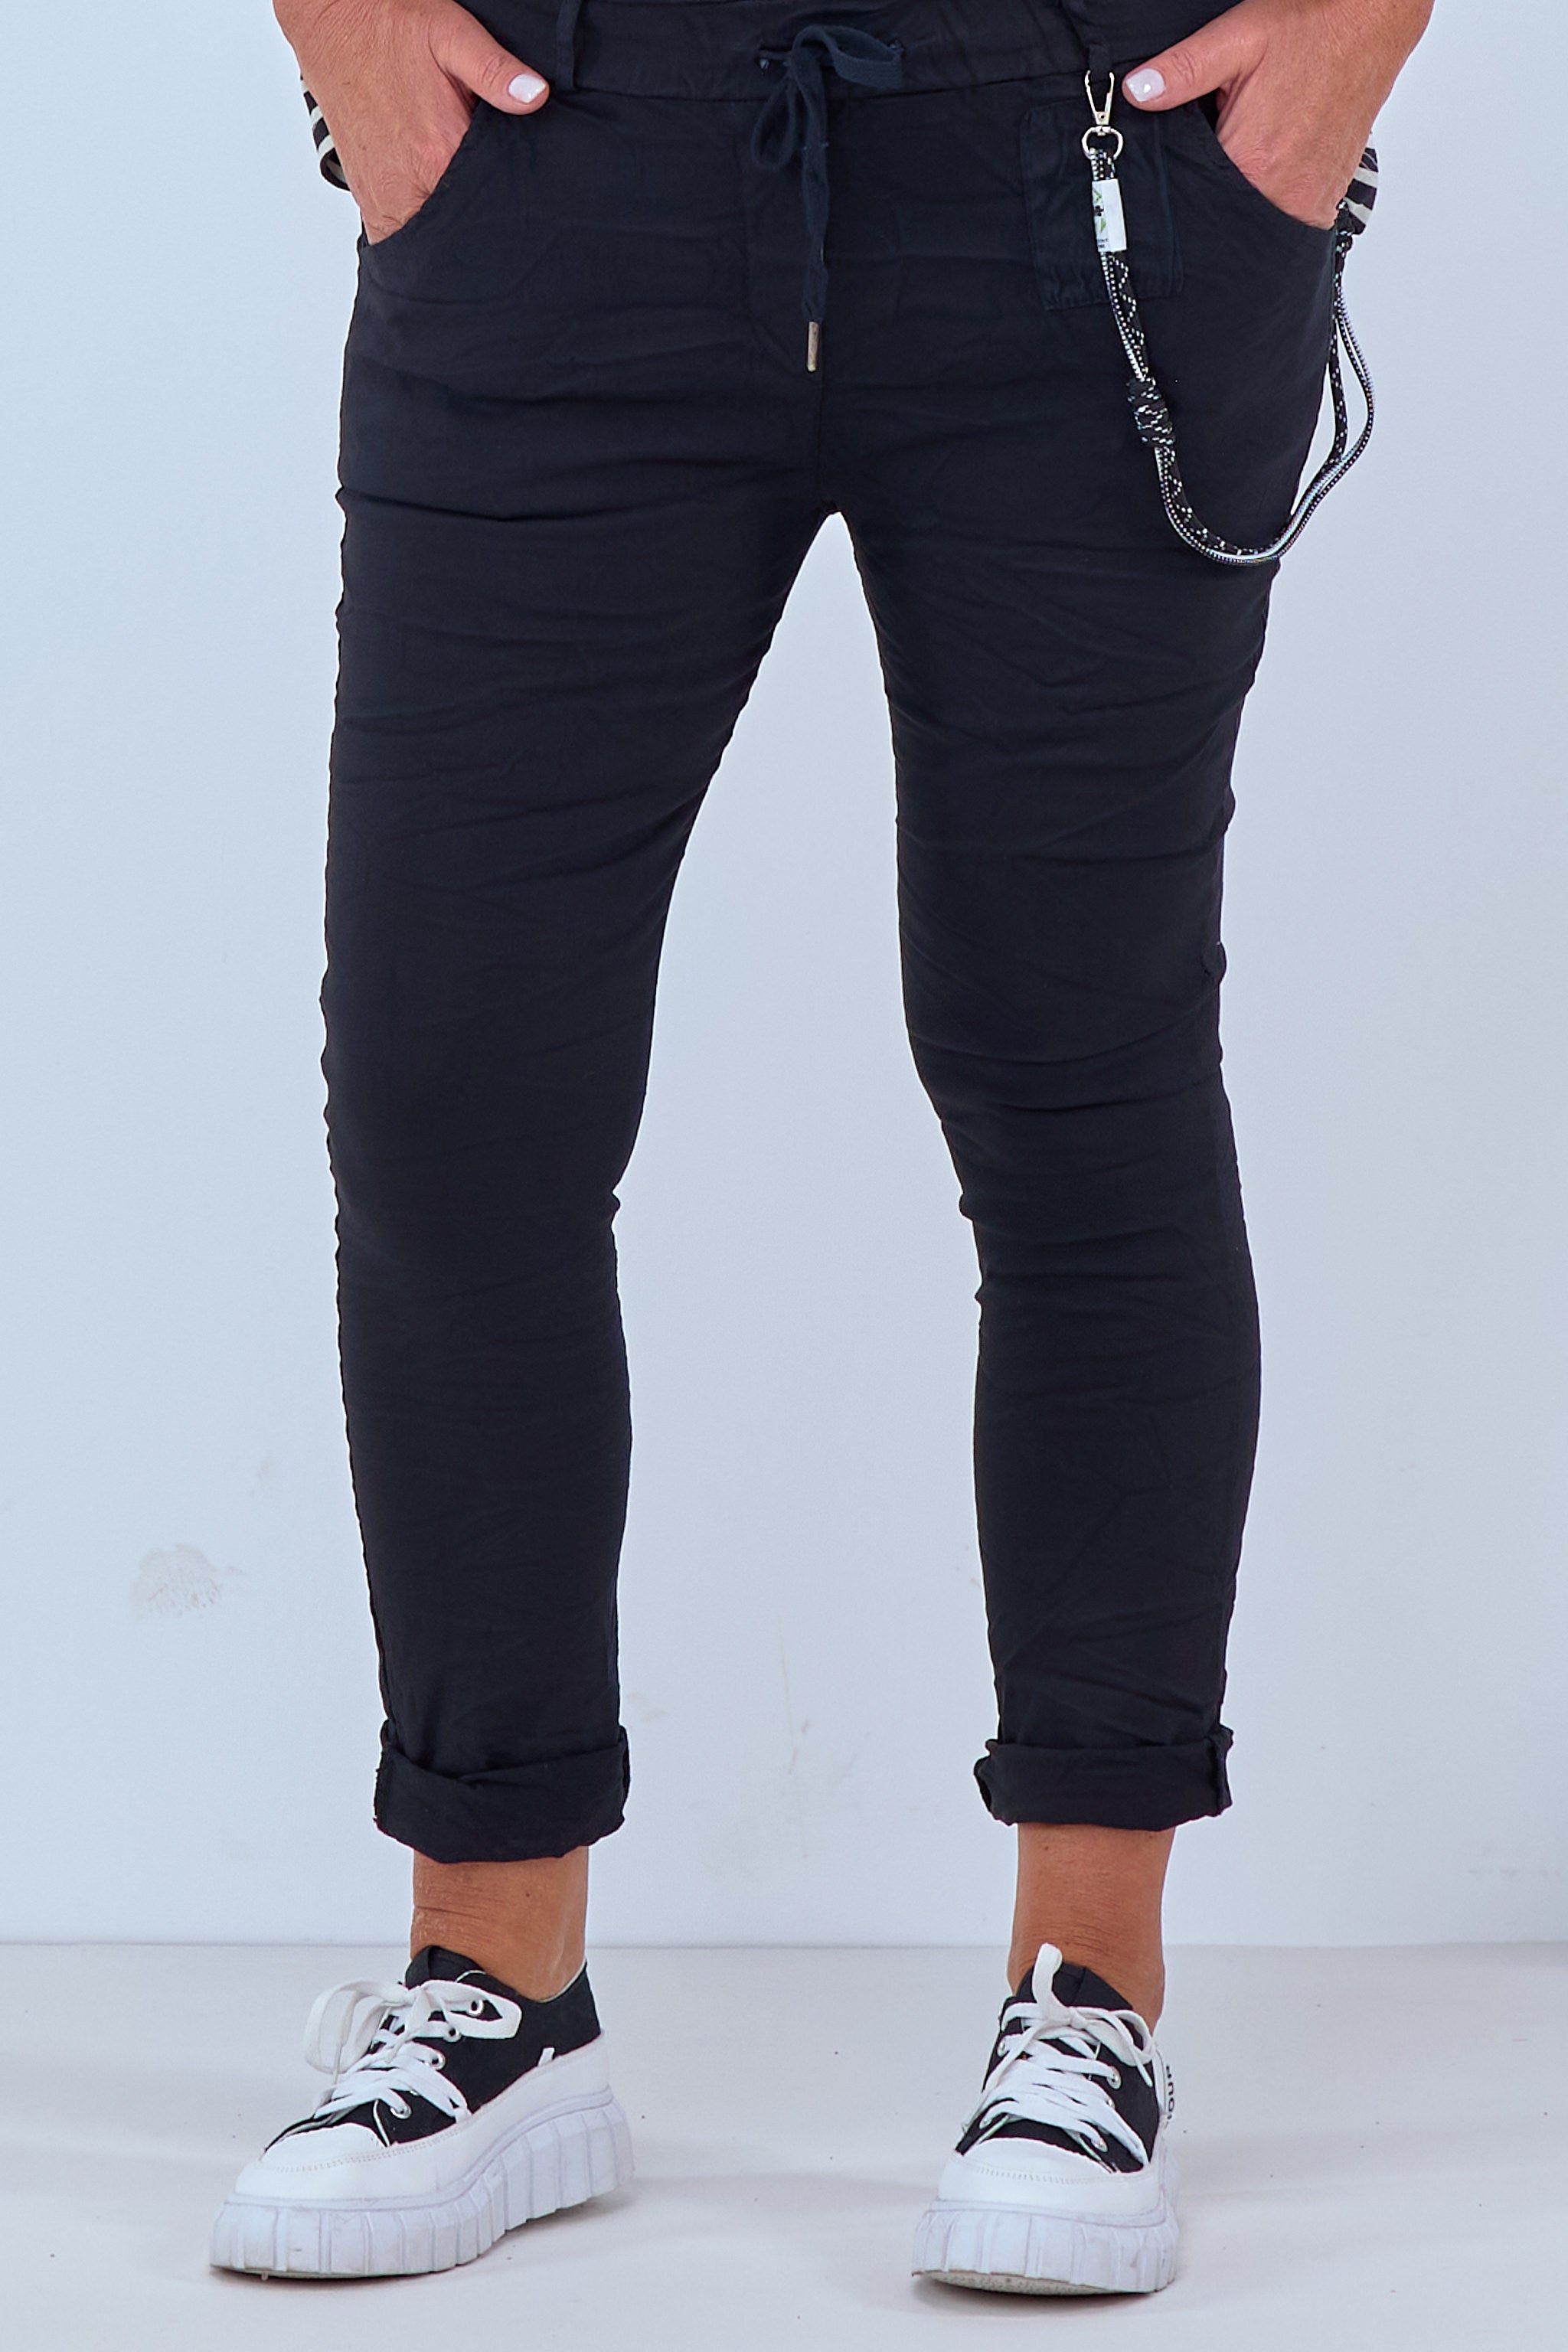 Pants with decorative cord, black